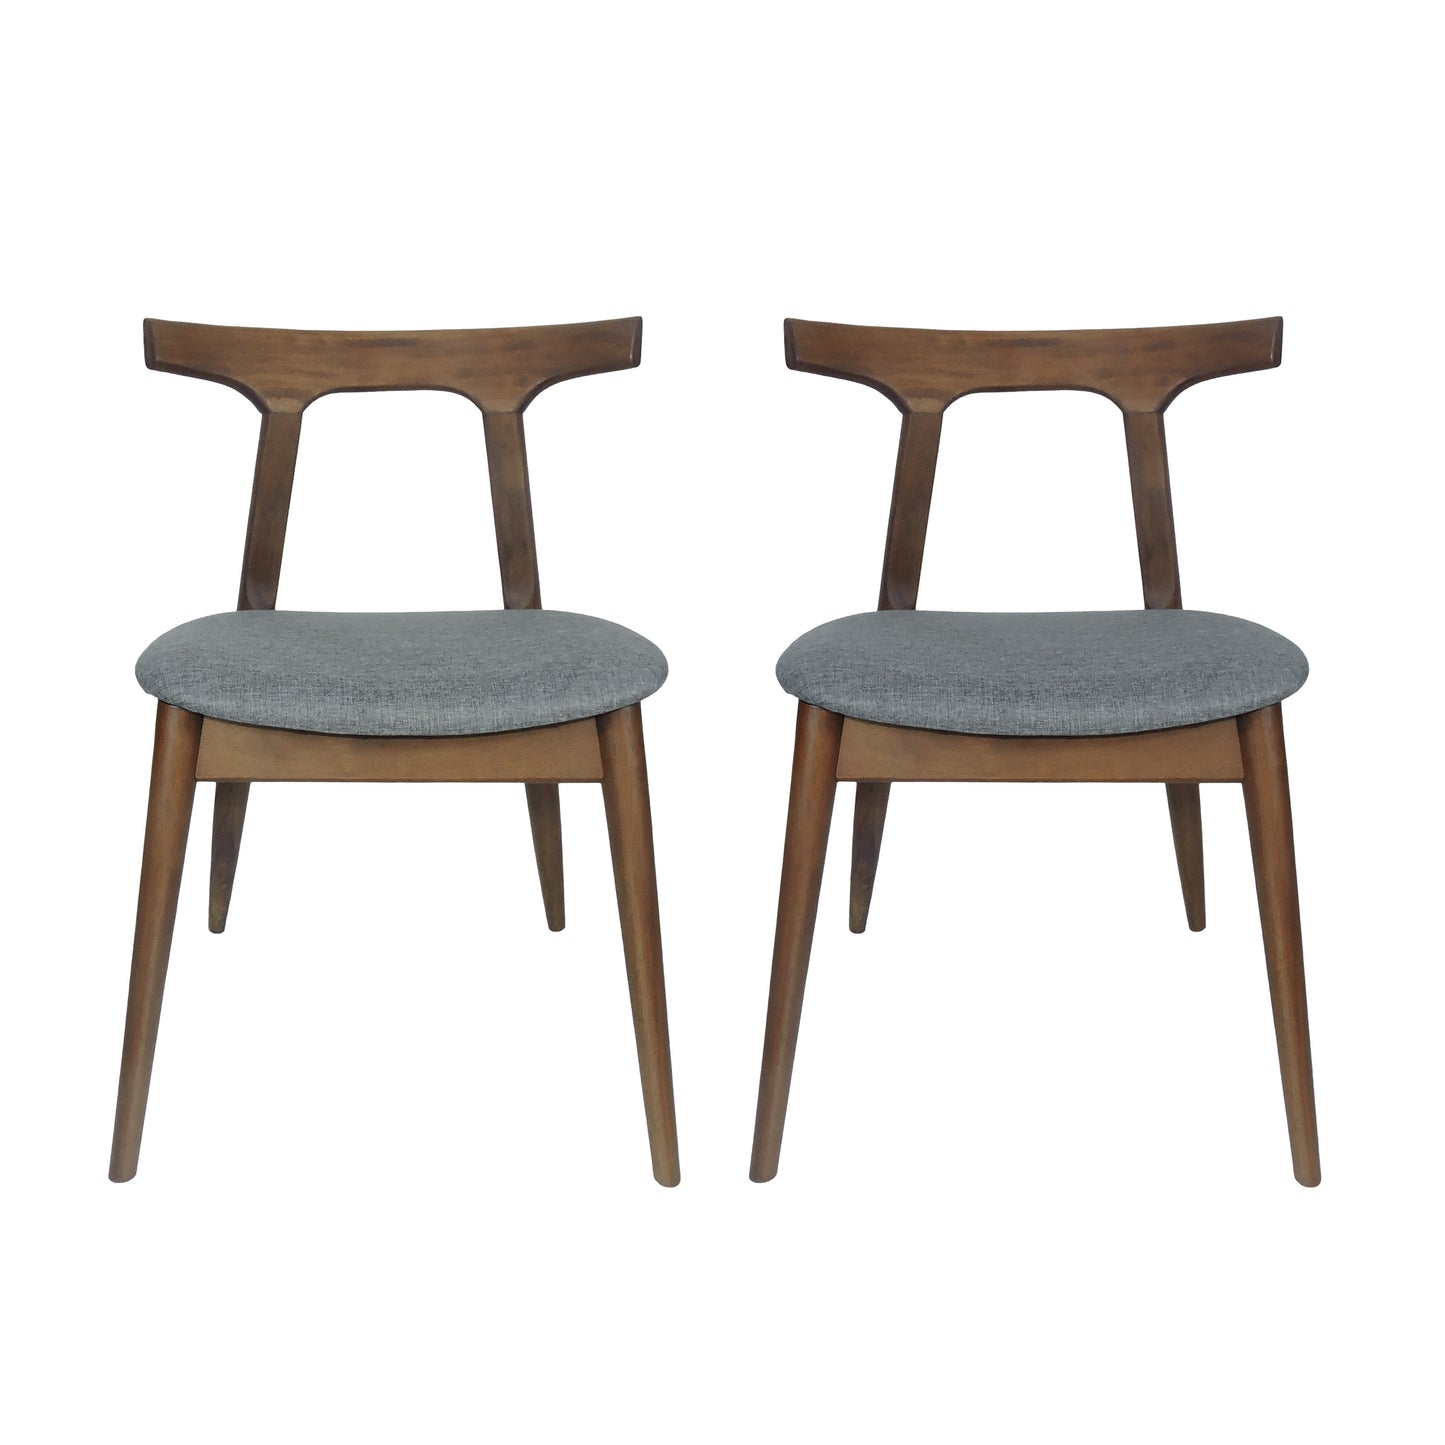 Danmore Mid Century Modern Fabric Upholstered Dining Chairs, Set of 2